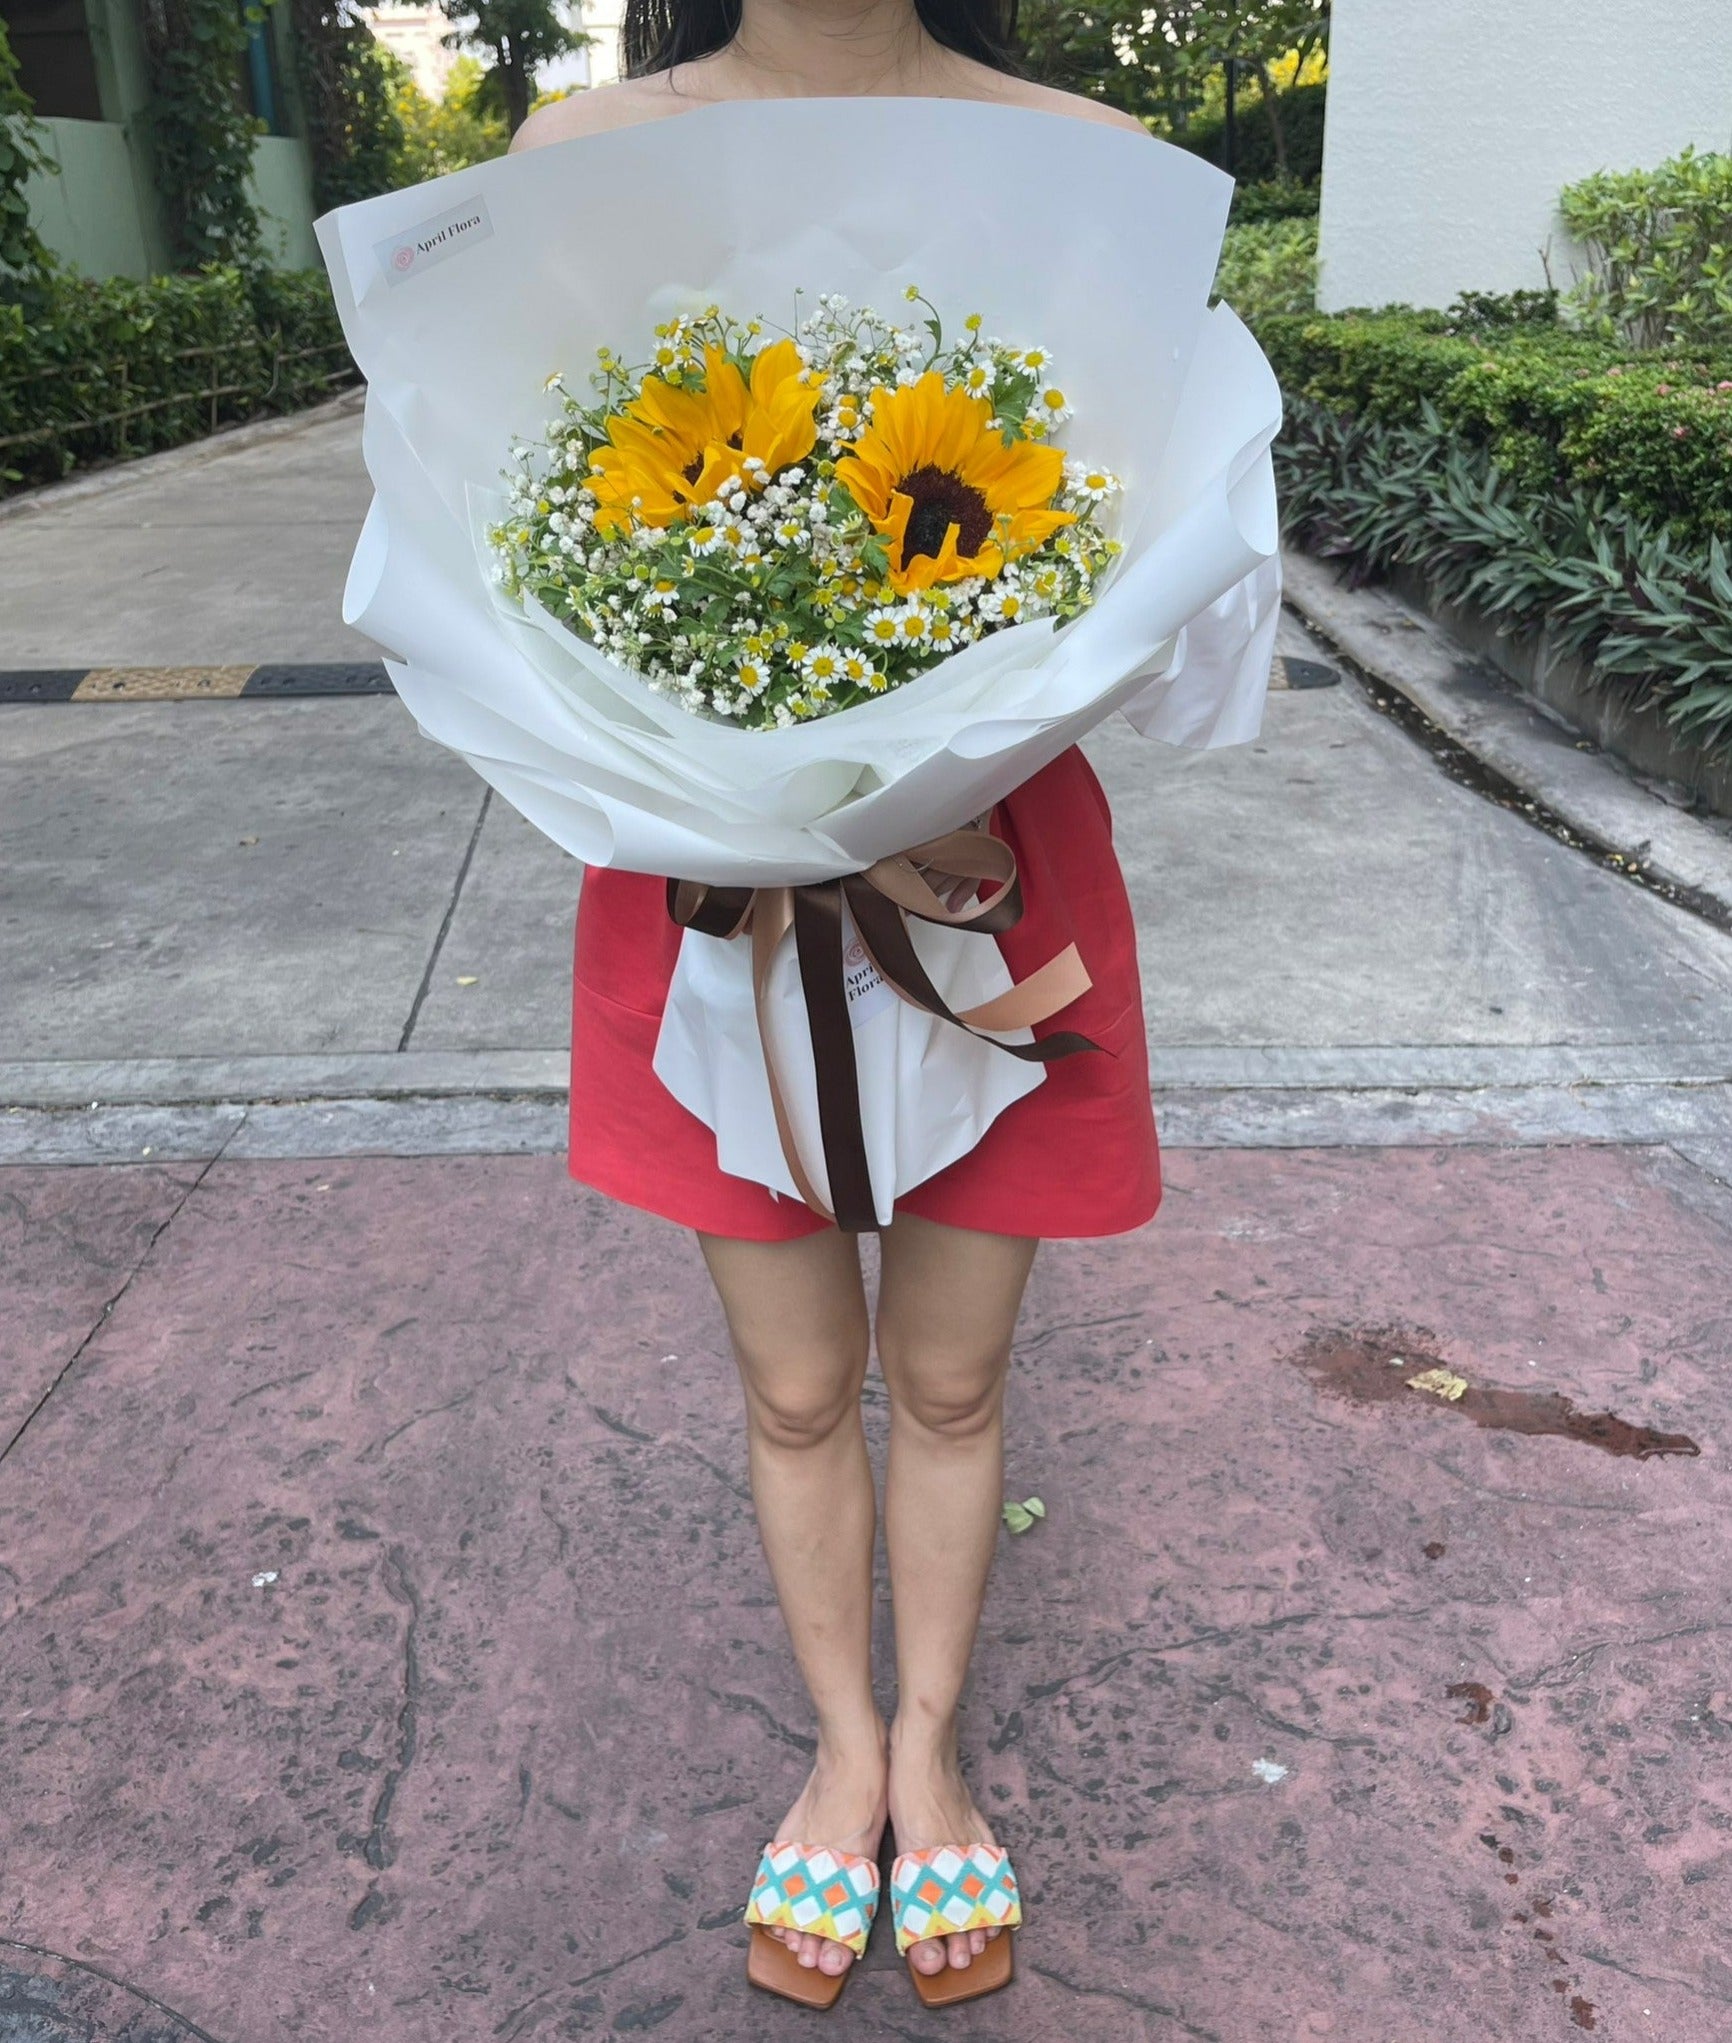 Sweet Bouquet Of Sunflowers mixed with Daisy - Phuket